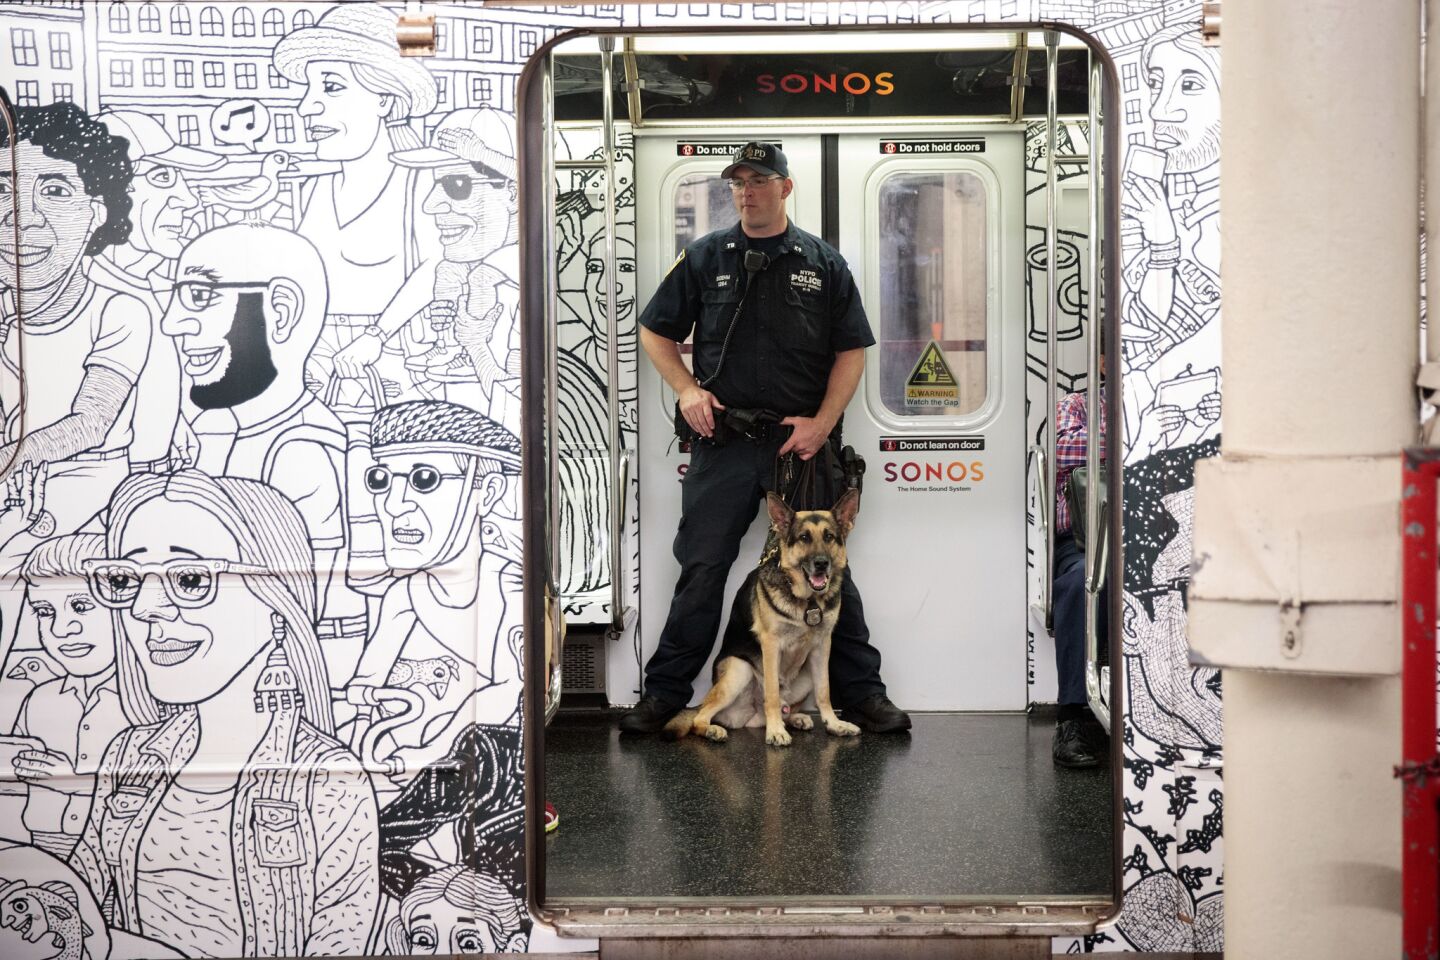 A member of the NYPD K-9 Unit patrols on a subway train between Grand Central Terminal and Times Square in Manhattan.